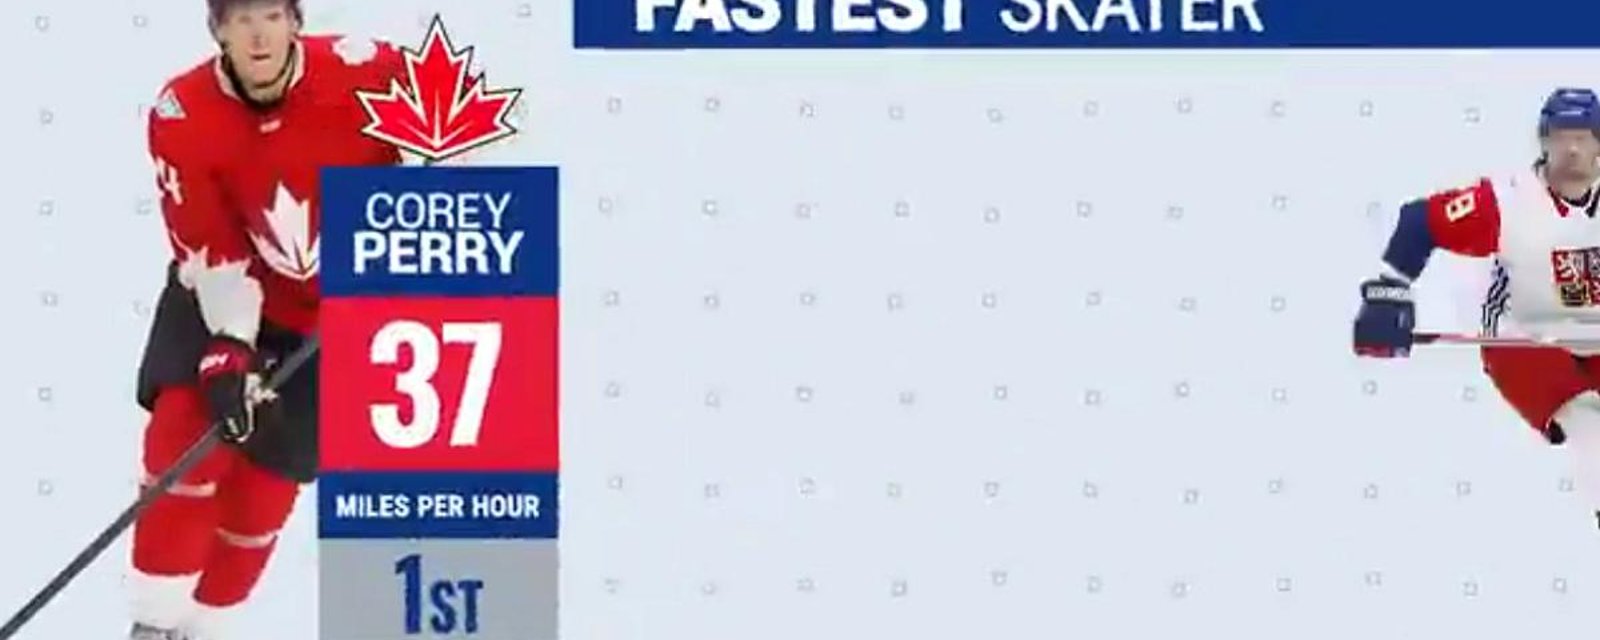 The NHL has unveiled awesome new stat tracking from the World Cup.